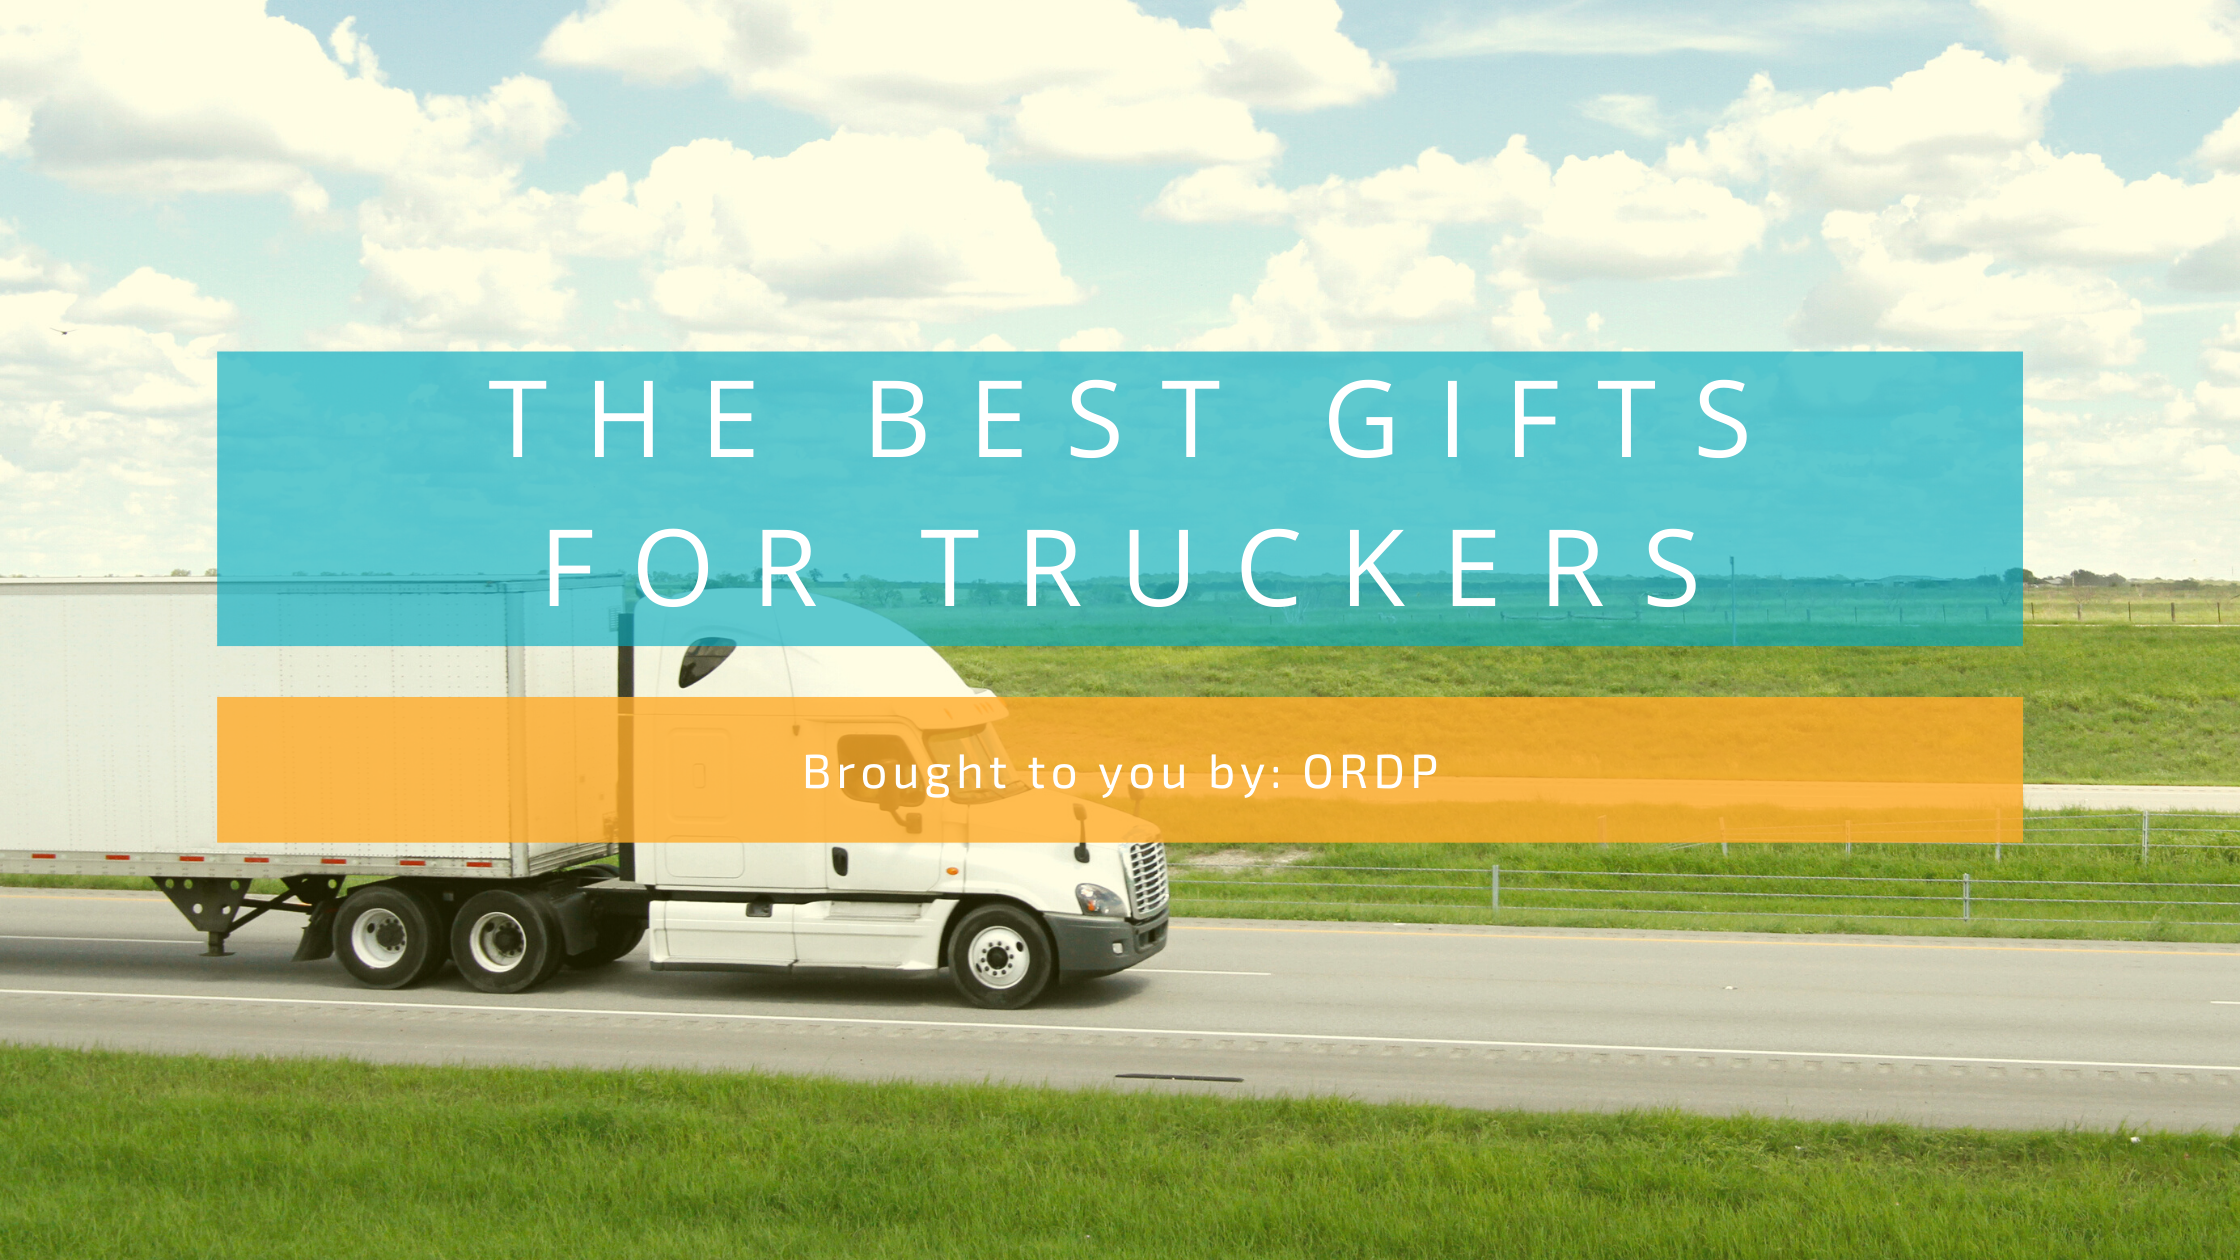 https://www.protectmycdl.com/wp-content/uploads/2021/04/Best-Gifts-for-Truckers-Blog-Banner.png